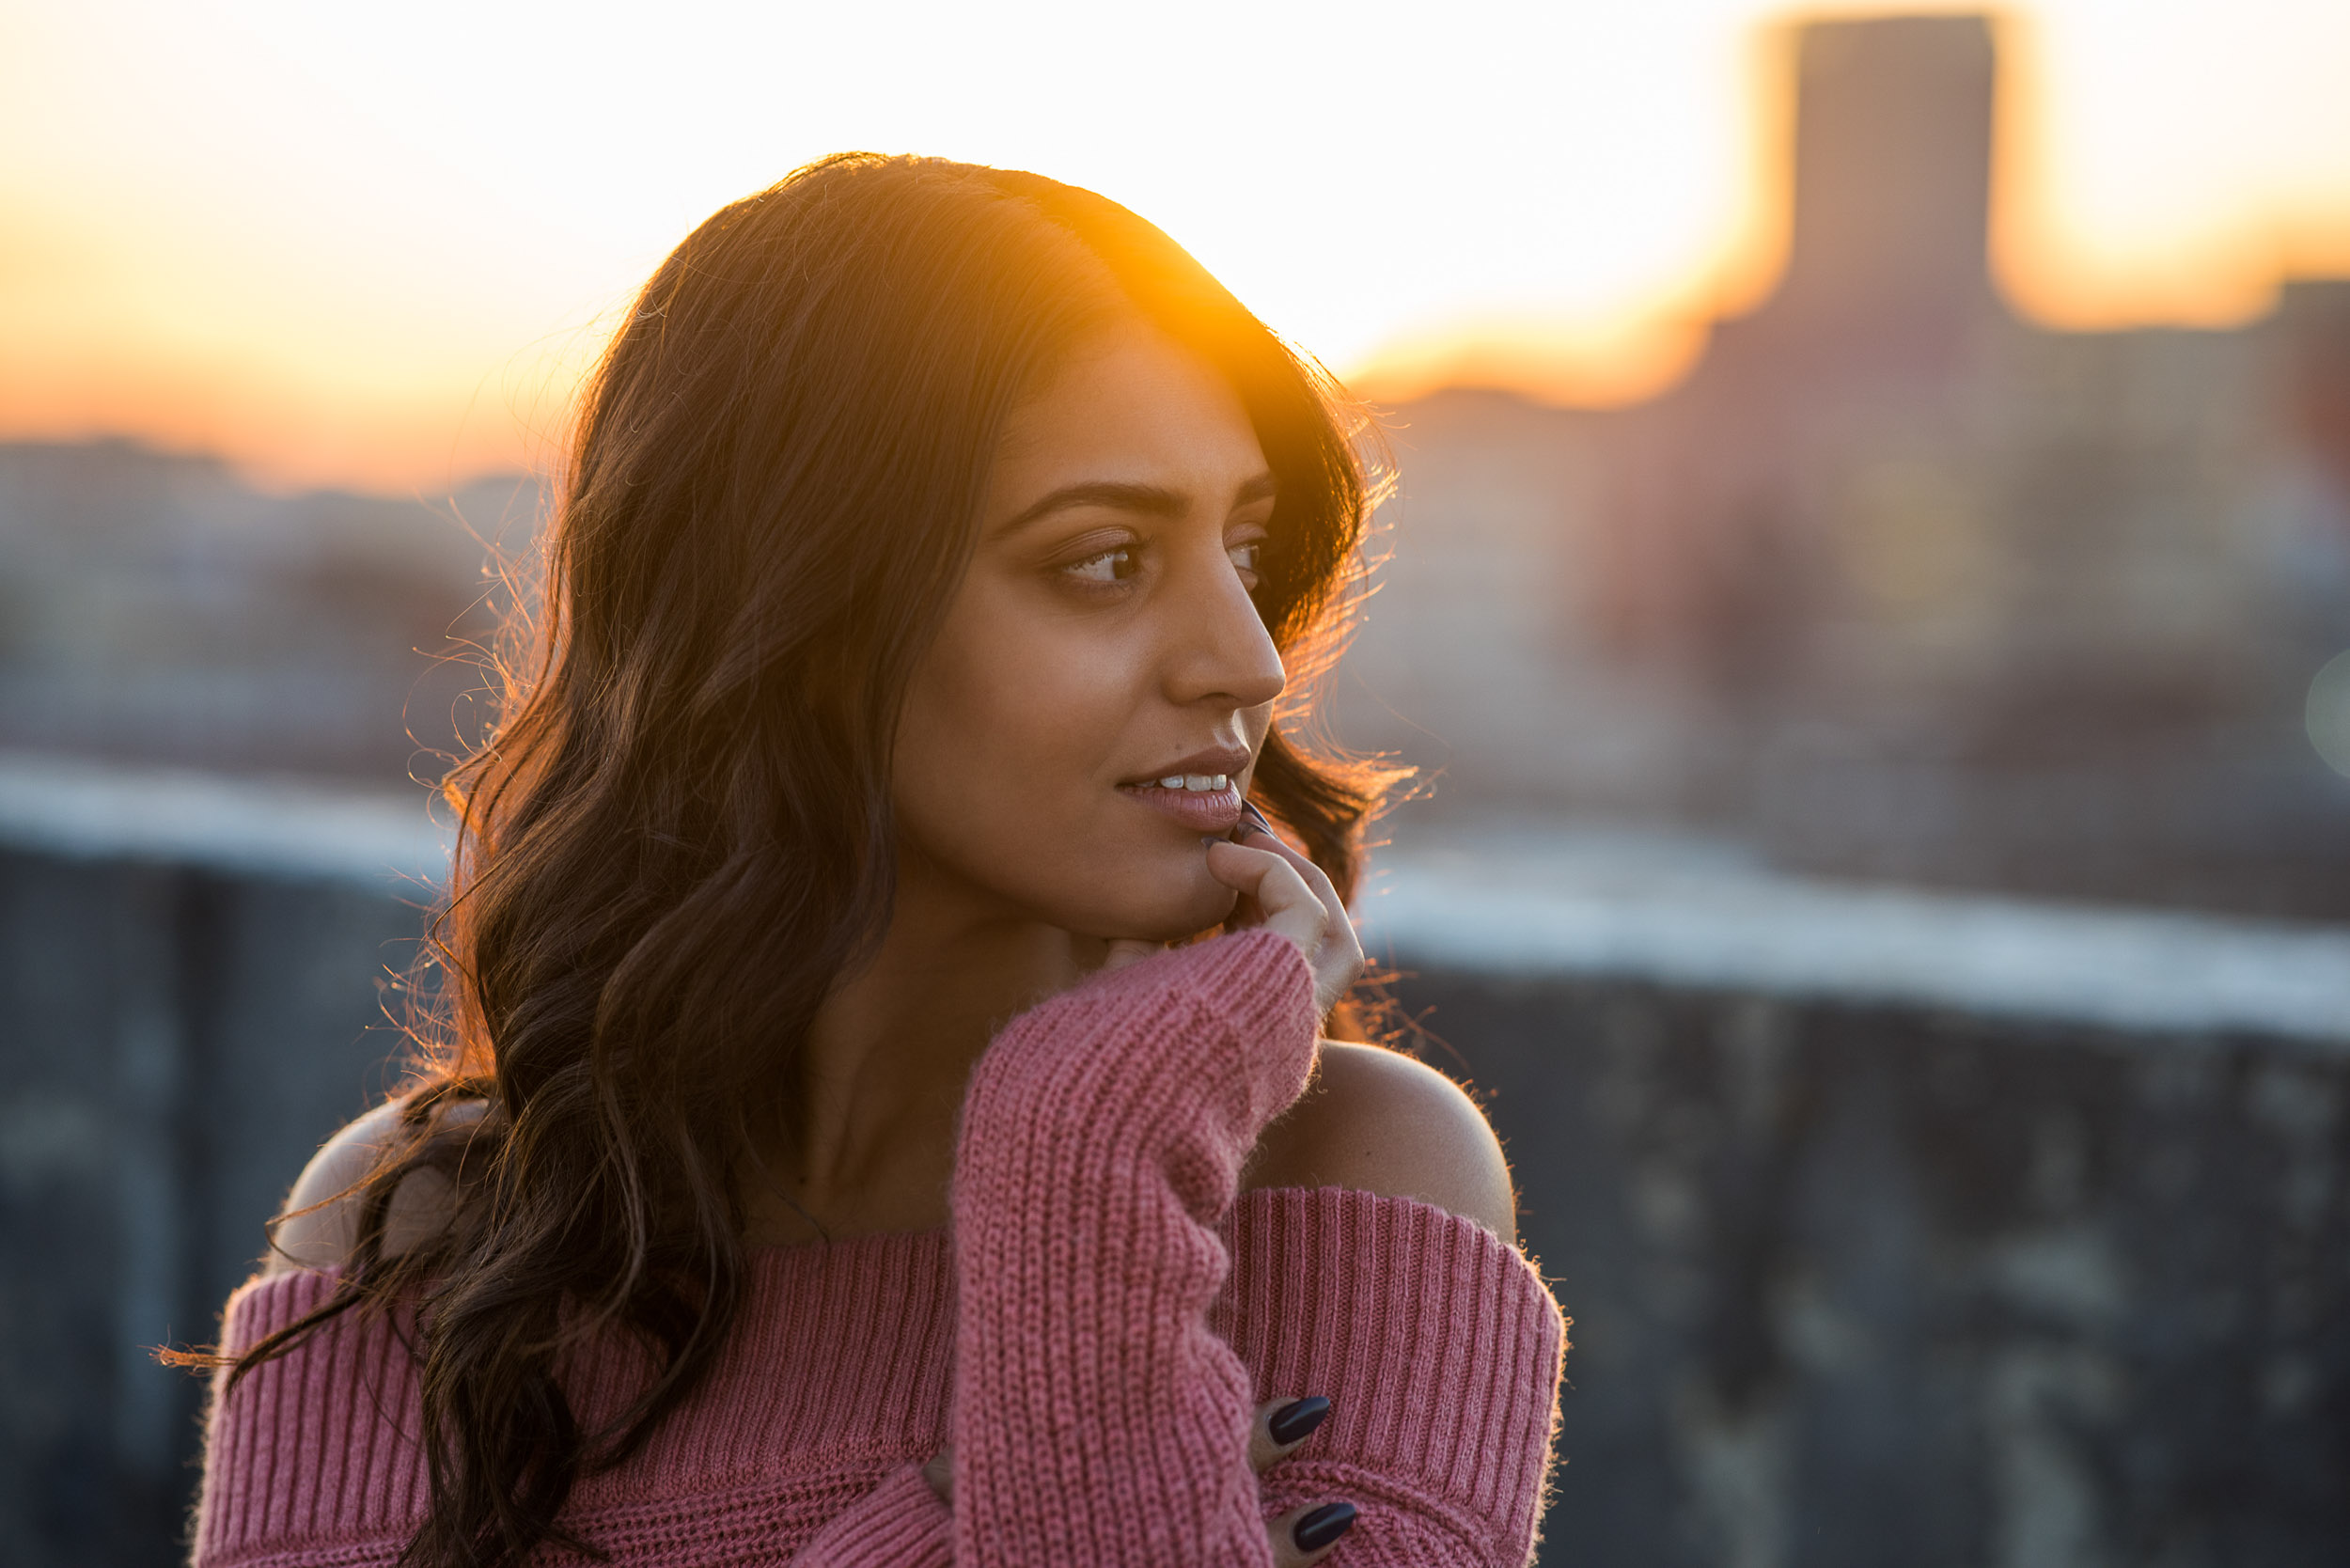 A model poses at sunset in downtown Los Angeles.